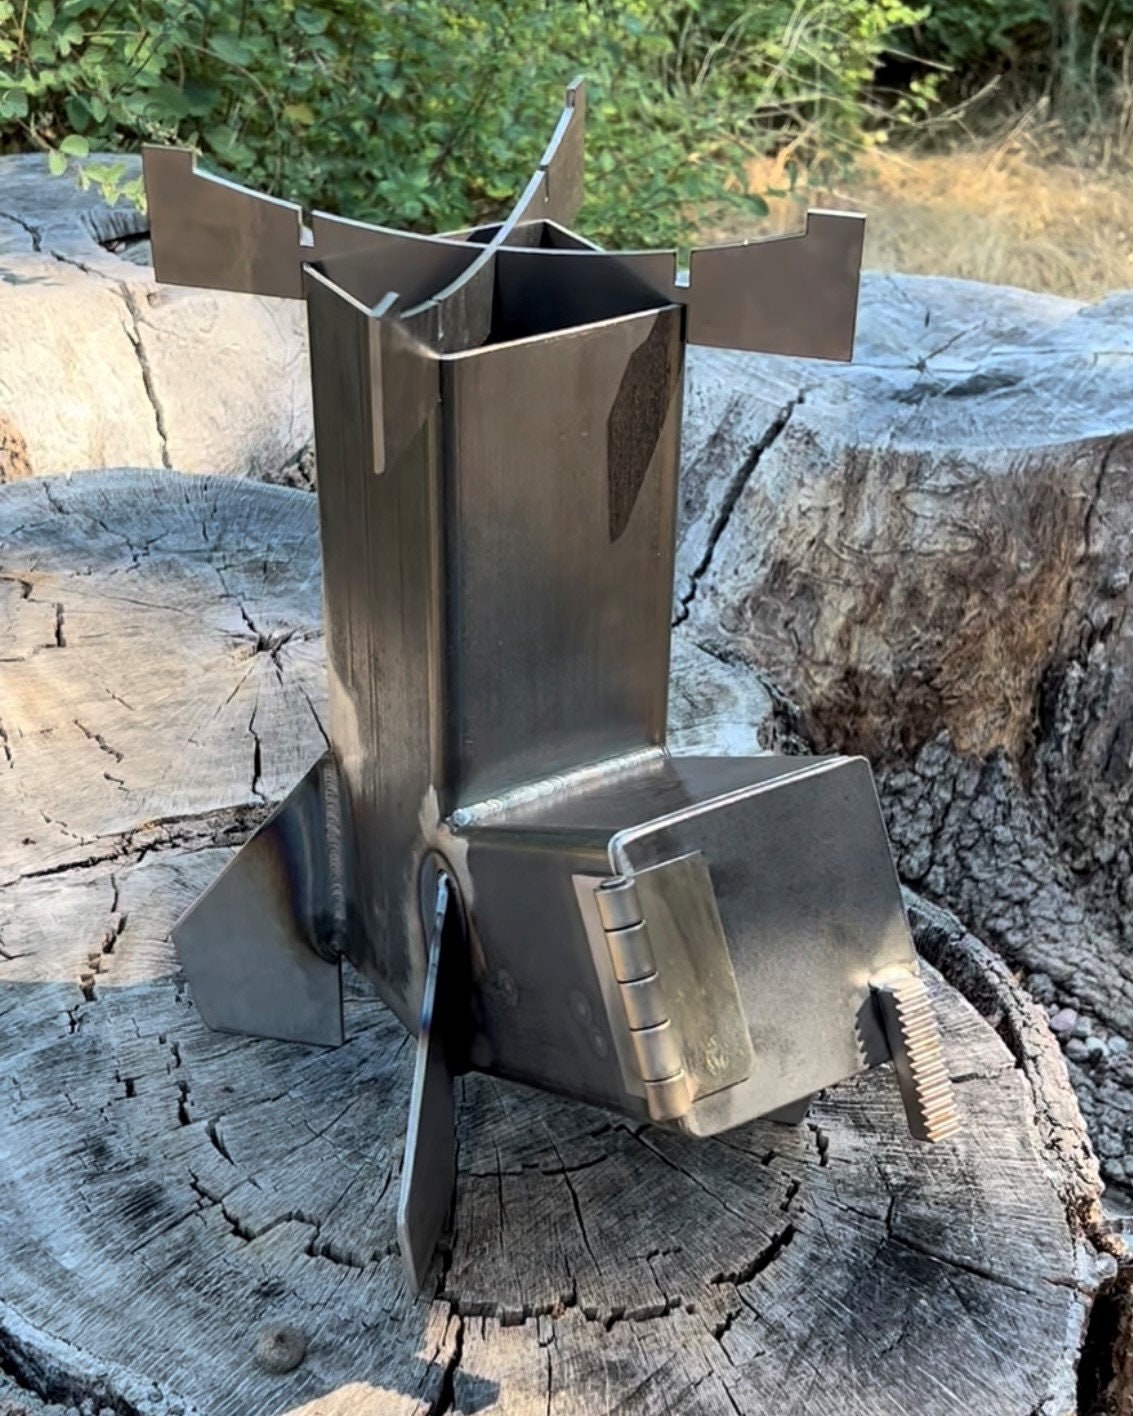 Spitfire BBQ Grill Set for Patrol Rocket Stove, Grill with cast Iron Rack,  Unique Barbecue Grill Set, Ultimate Outdoor Camping Backpacking Cooking